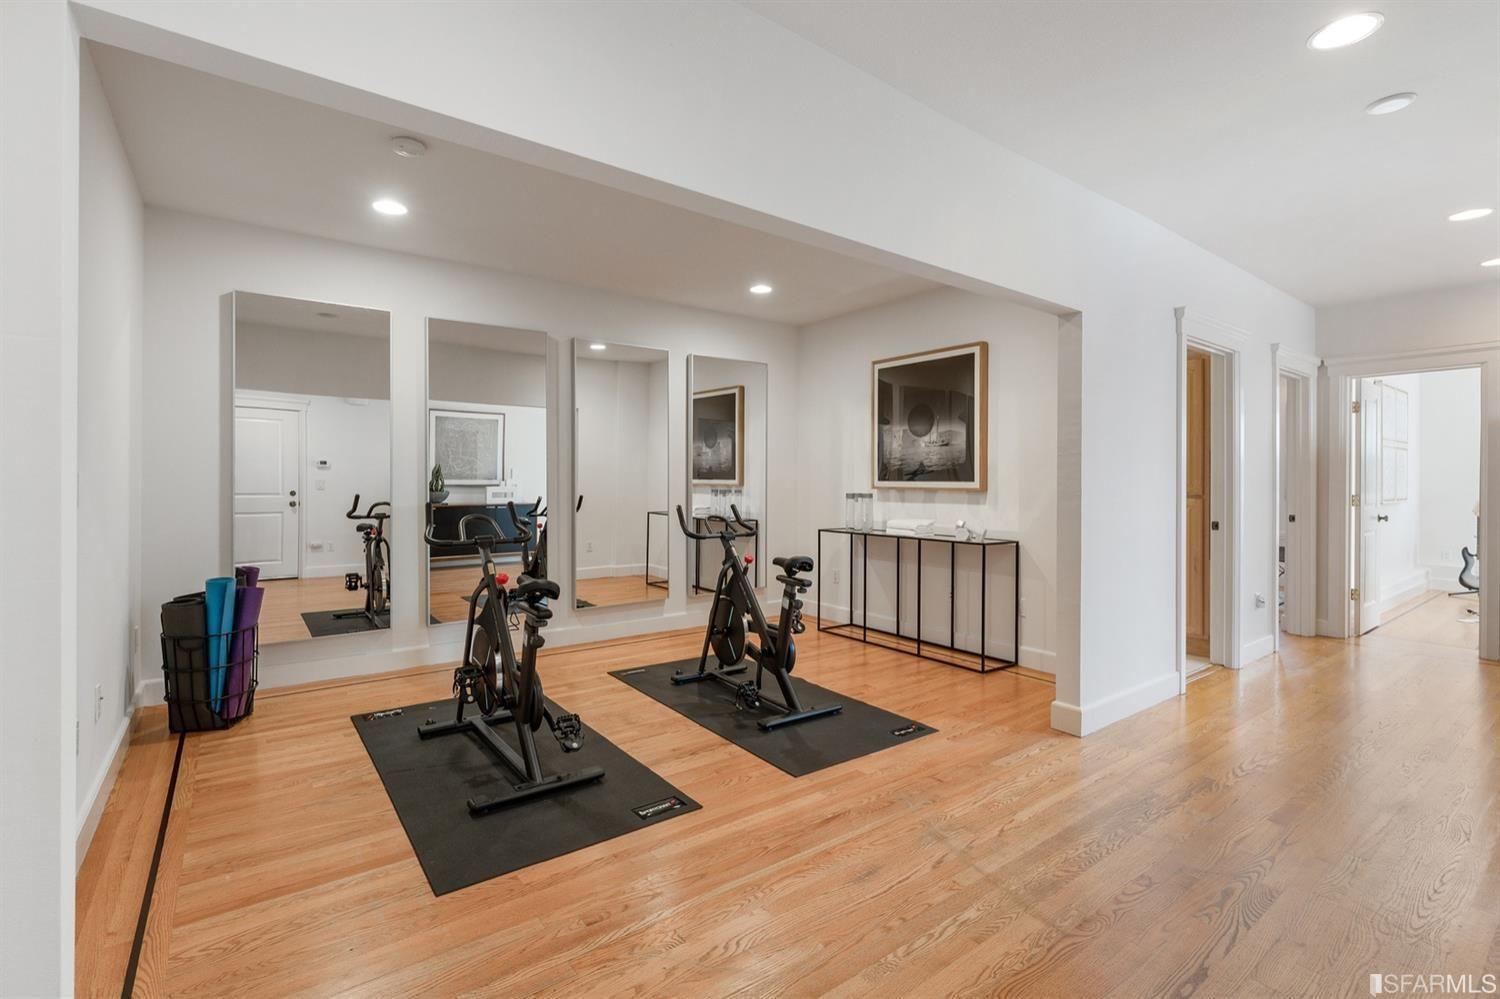 217-219 16th Avenue Gym space with two exercise bikes.